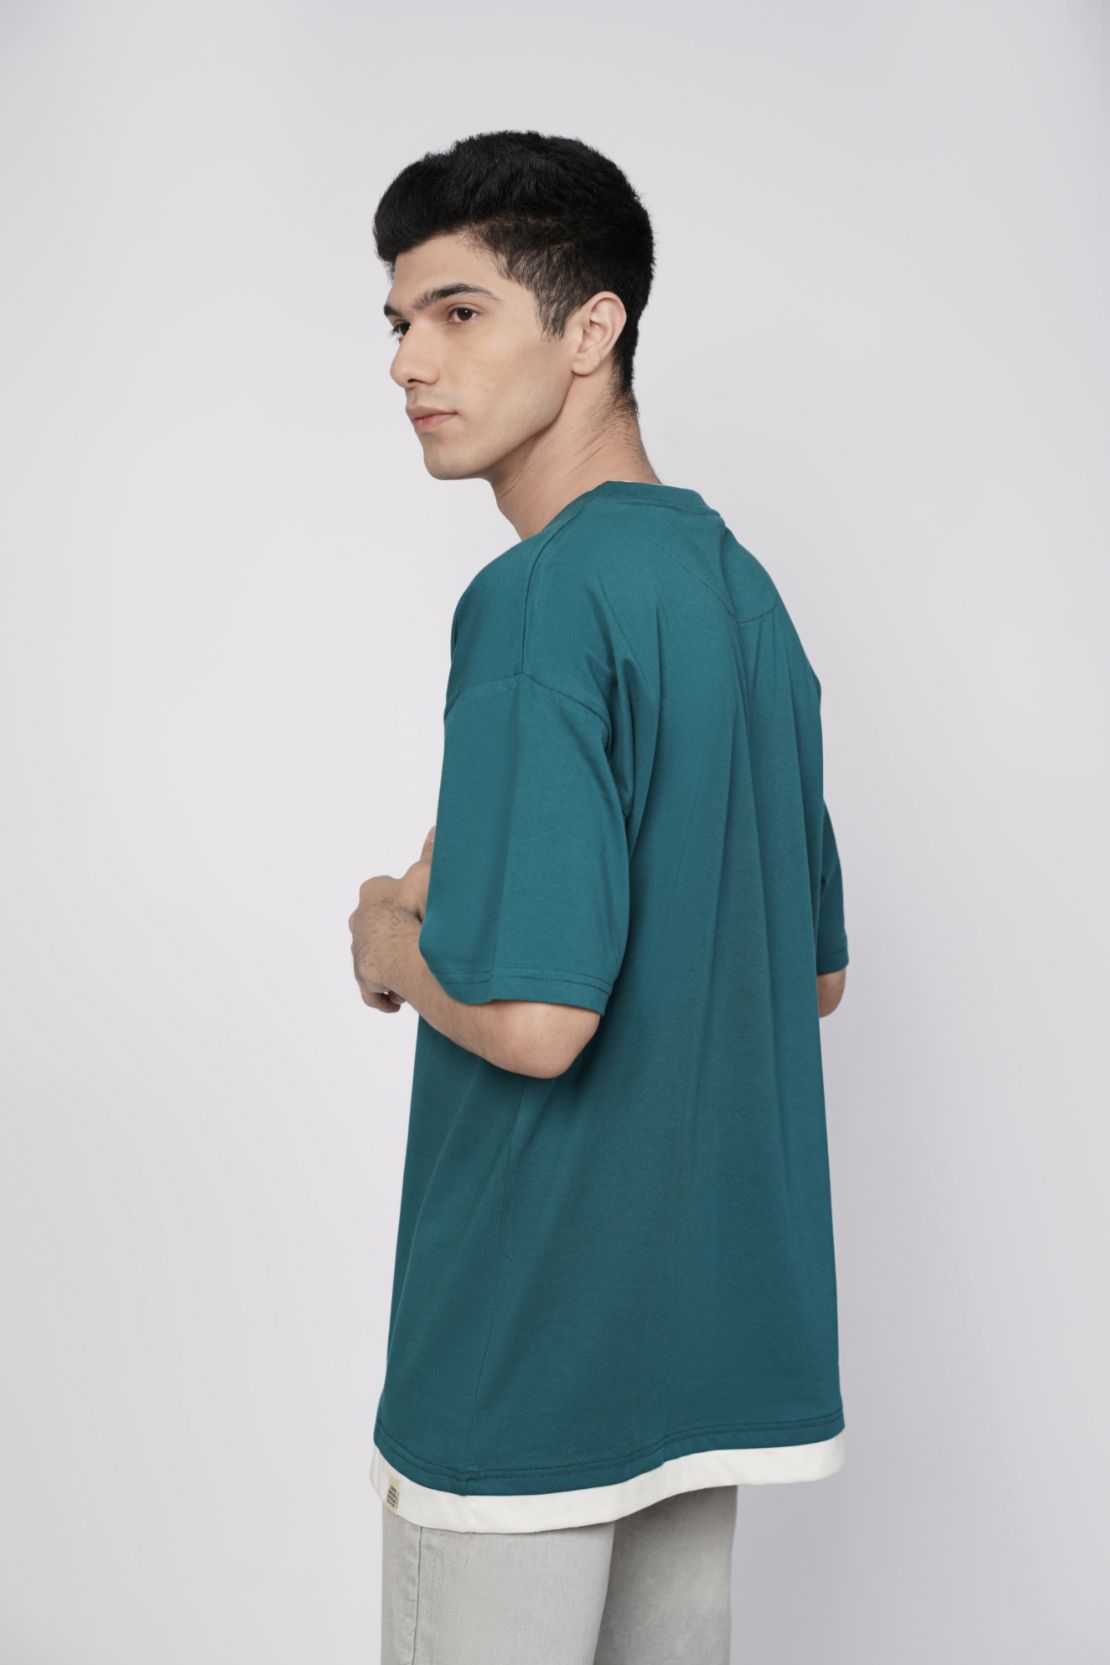 Relaxed Fit Teal Tee